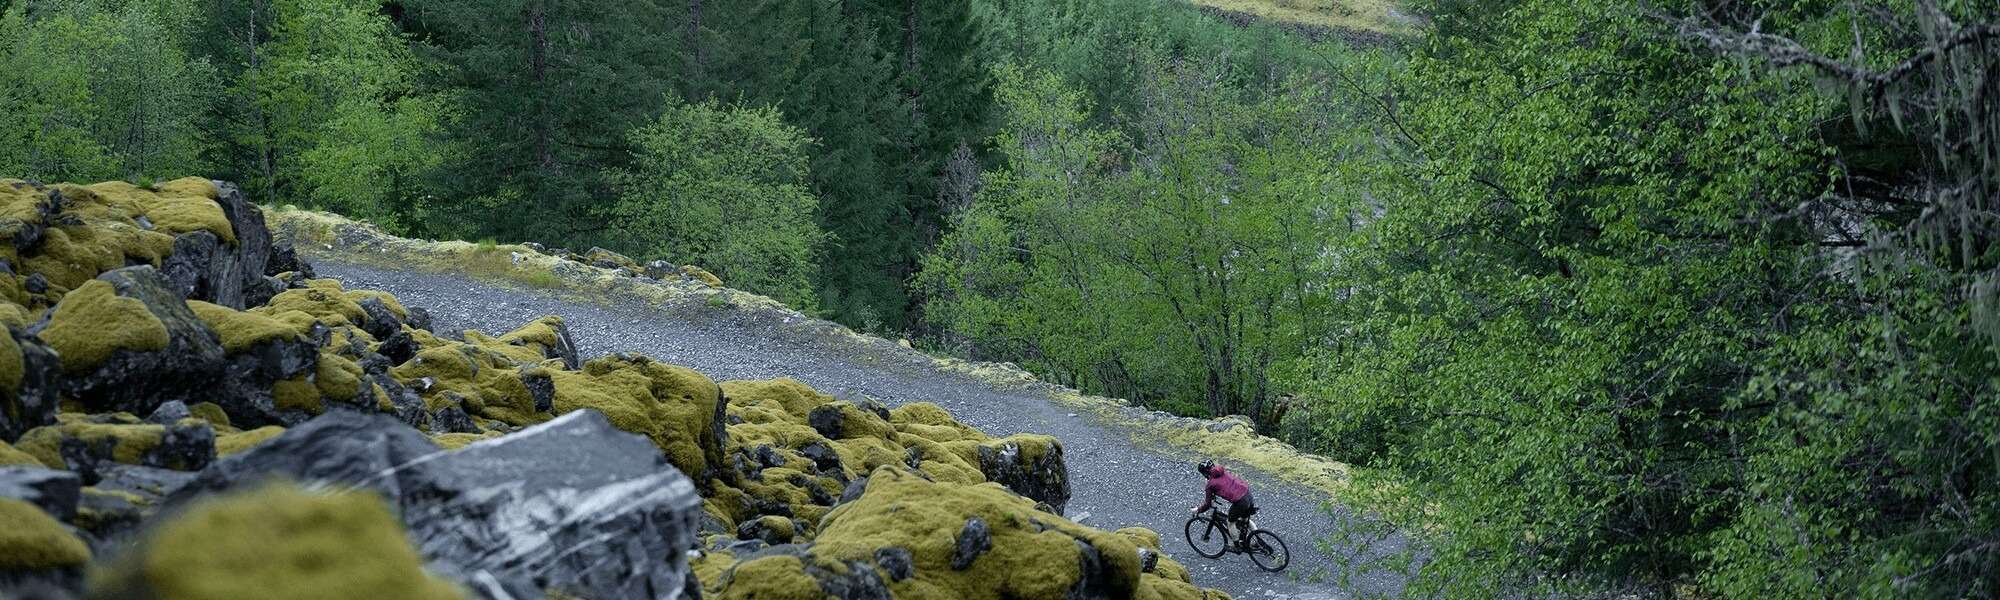 Aerial view of a cyclist riding on a curving gravel road that lines a rocky cliff